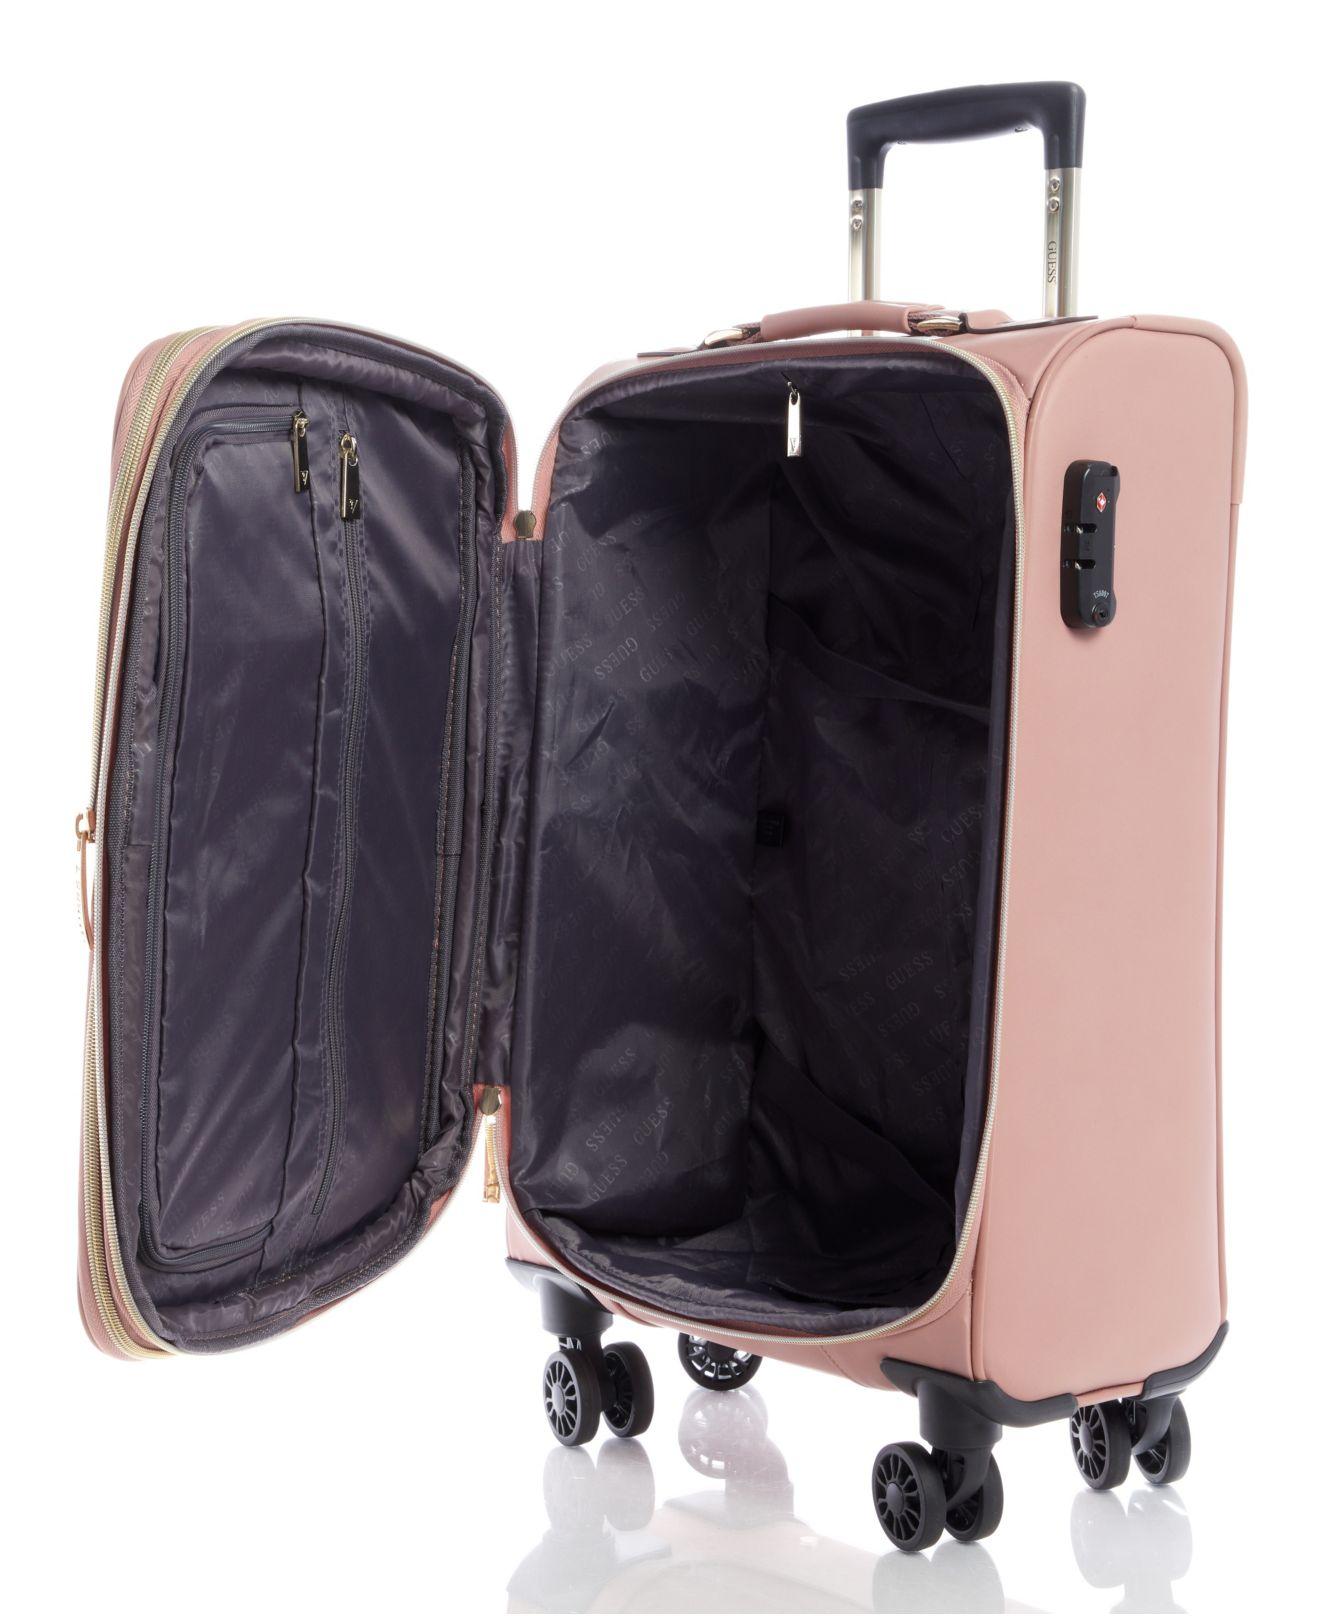 Guess Fashion Travel Janelle 20" Softside Carry-on Spinner in Pink | Lyst